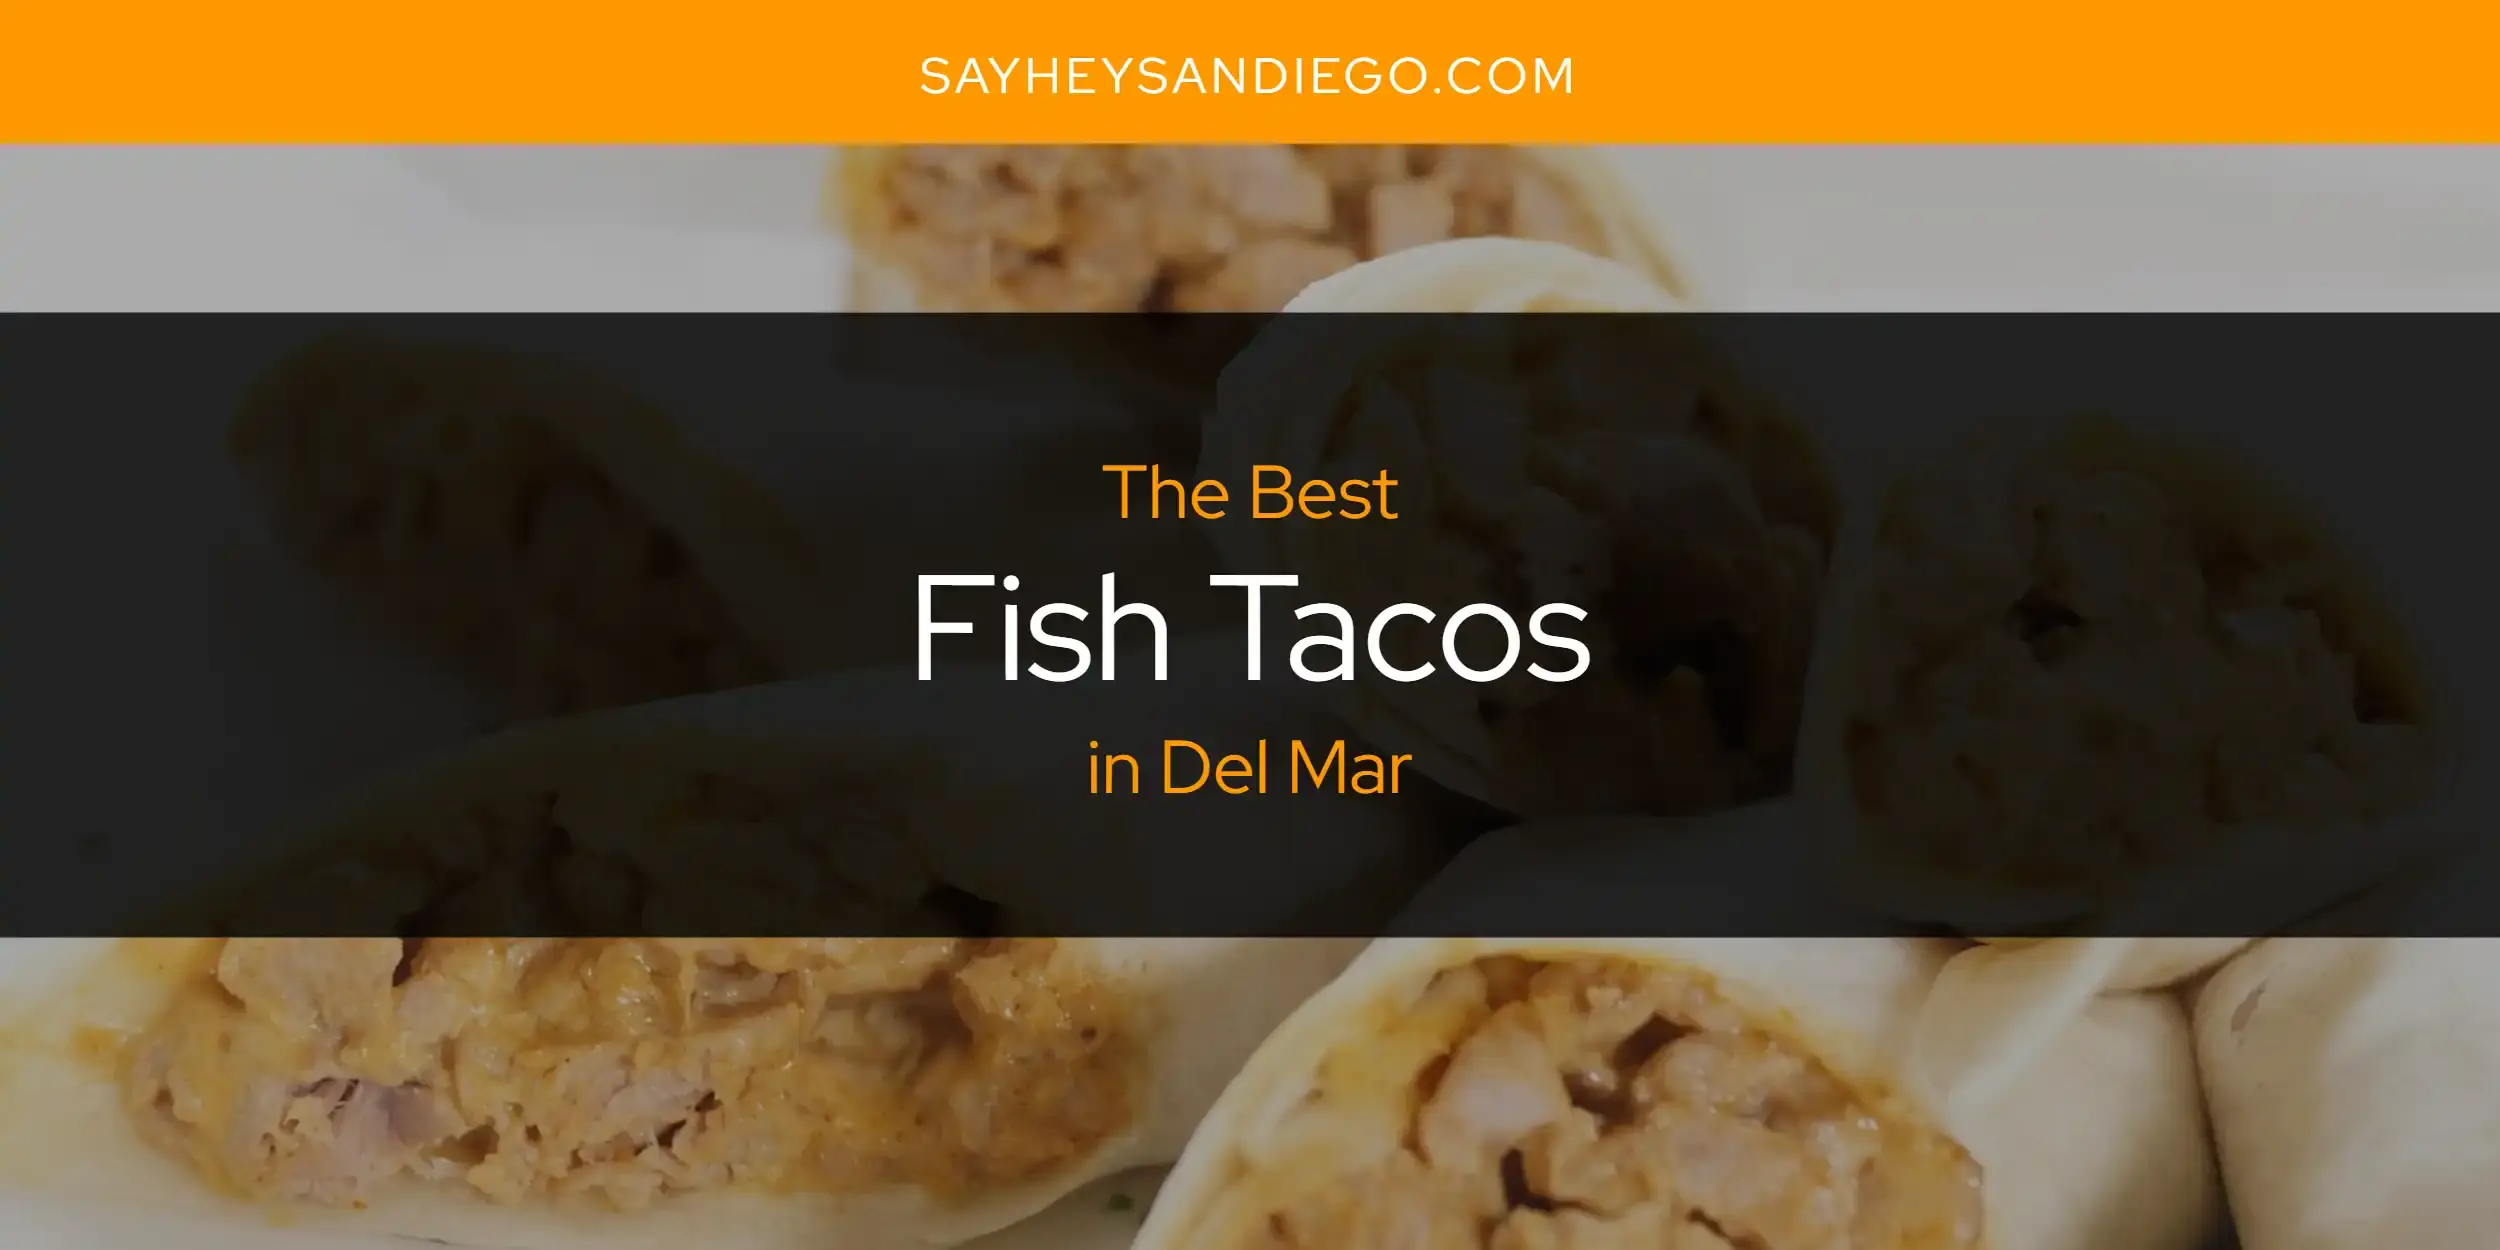 Best Fish Tacos in Del Mar? Here's the Top 13